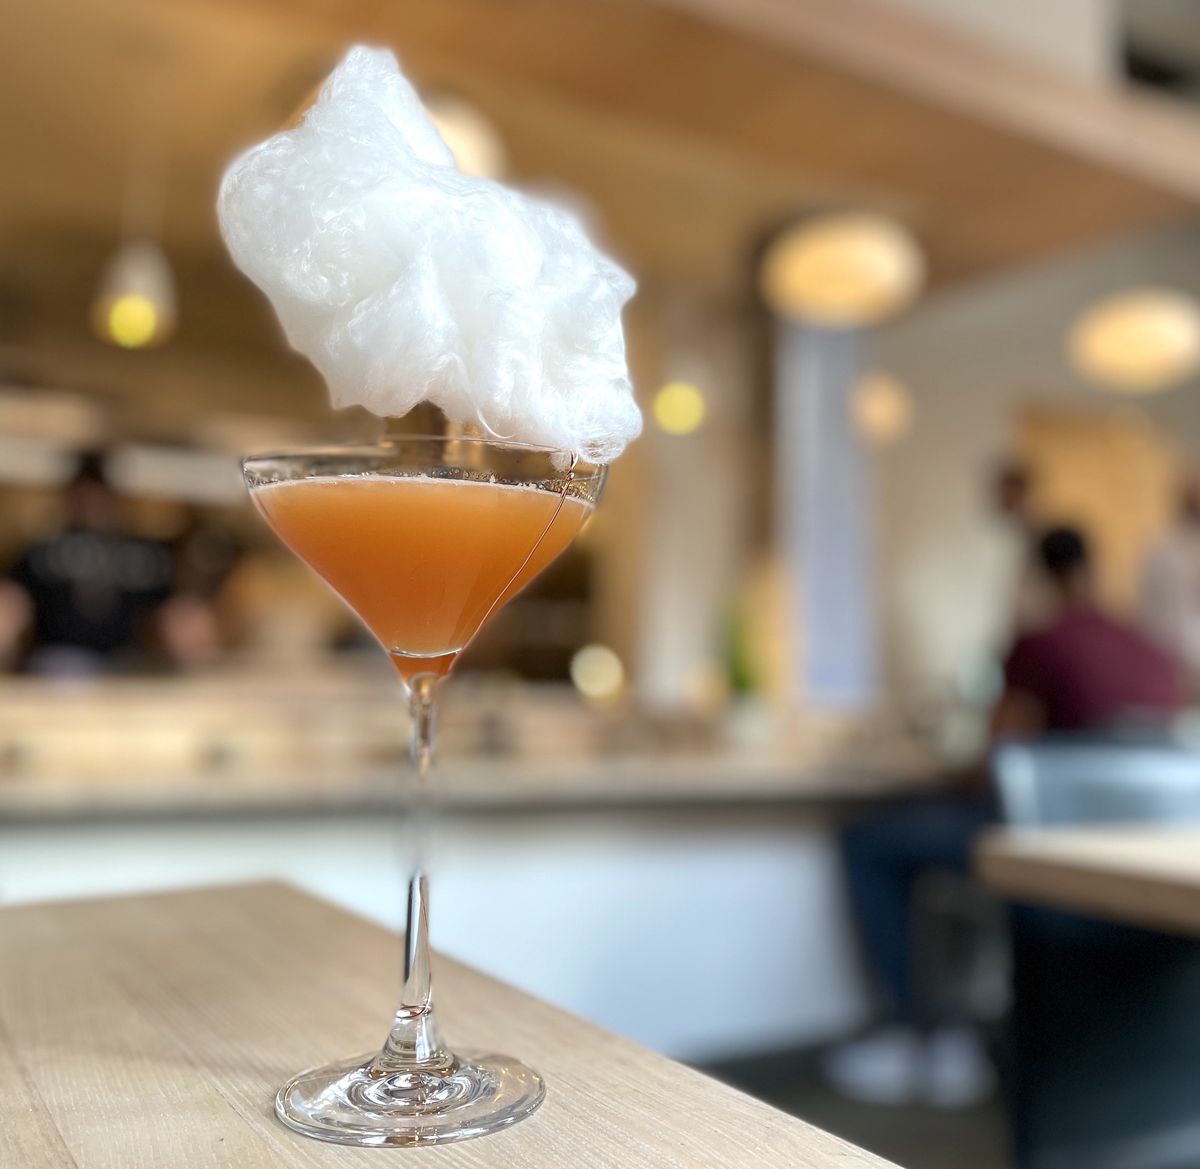 A martini glass is filled with orange liquid on a blonde wood table. It appears that there is a floating cloud above the glass, because a cotton candy puff is placed on it. 